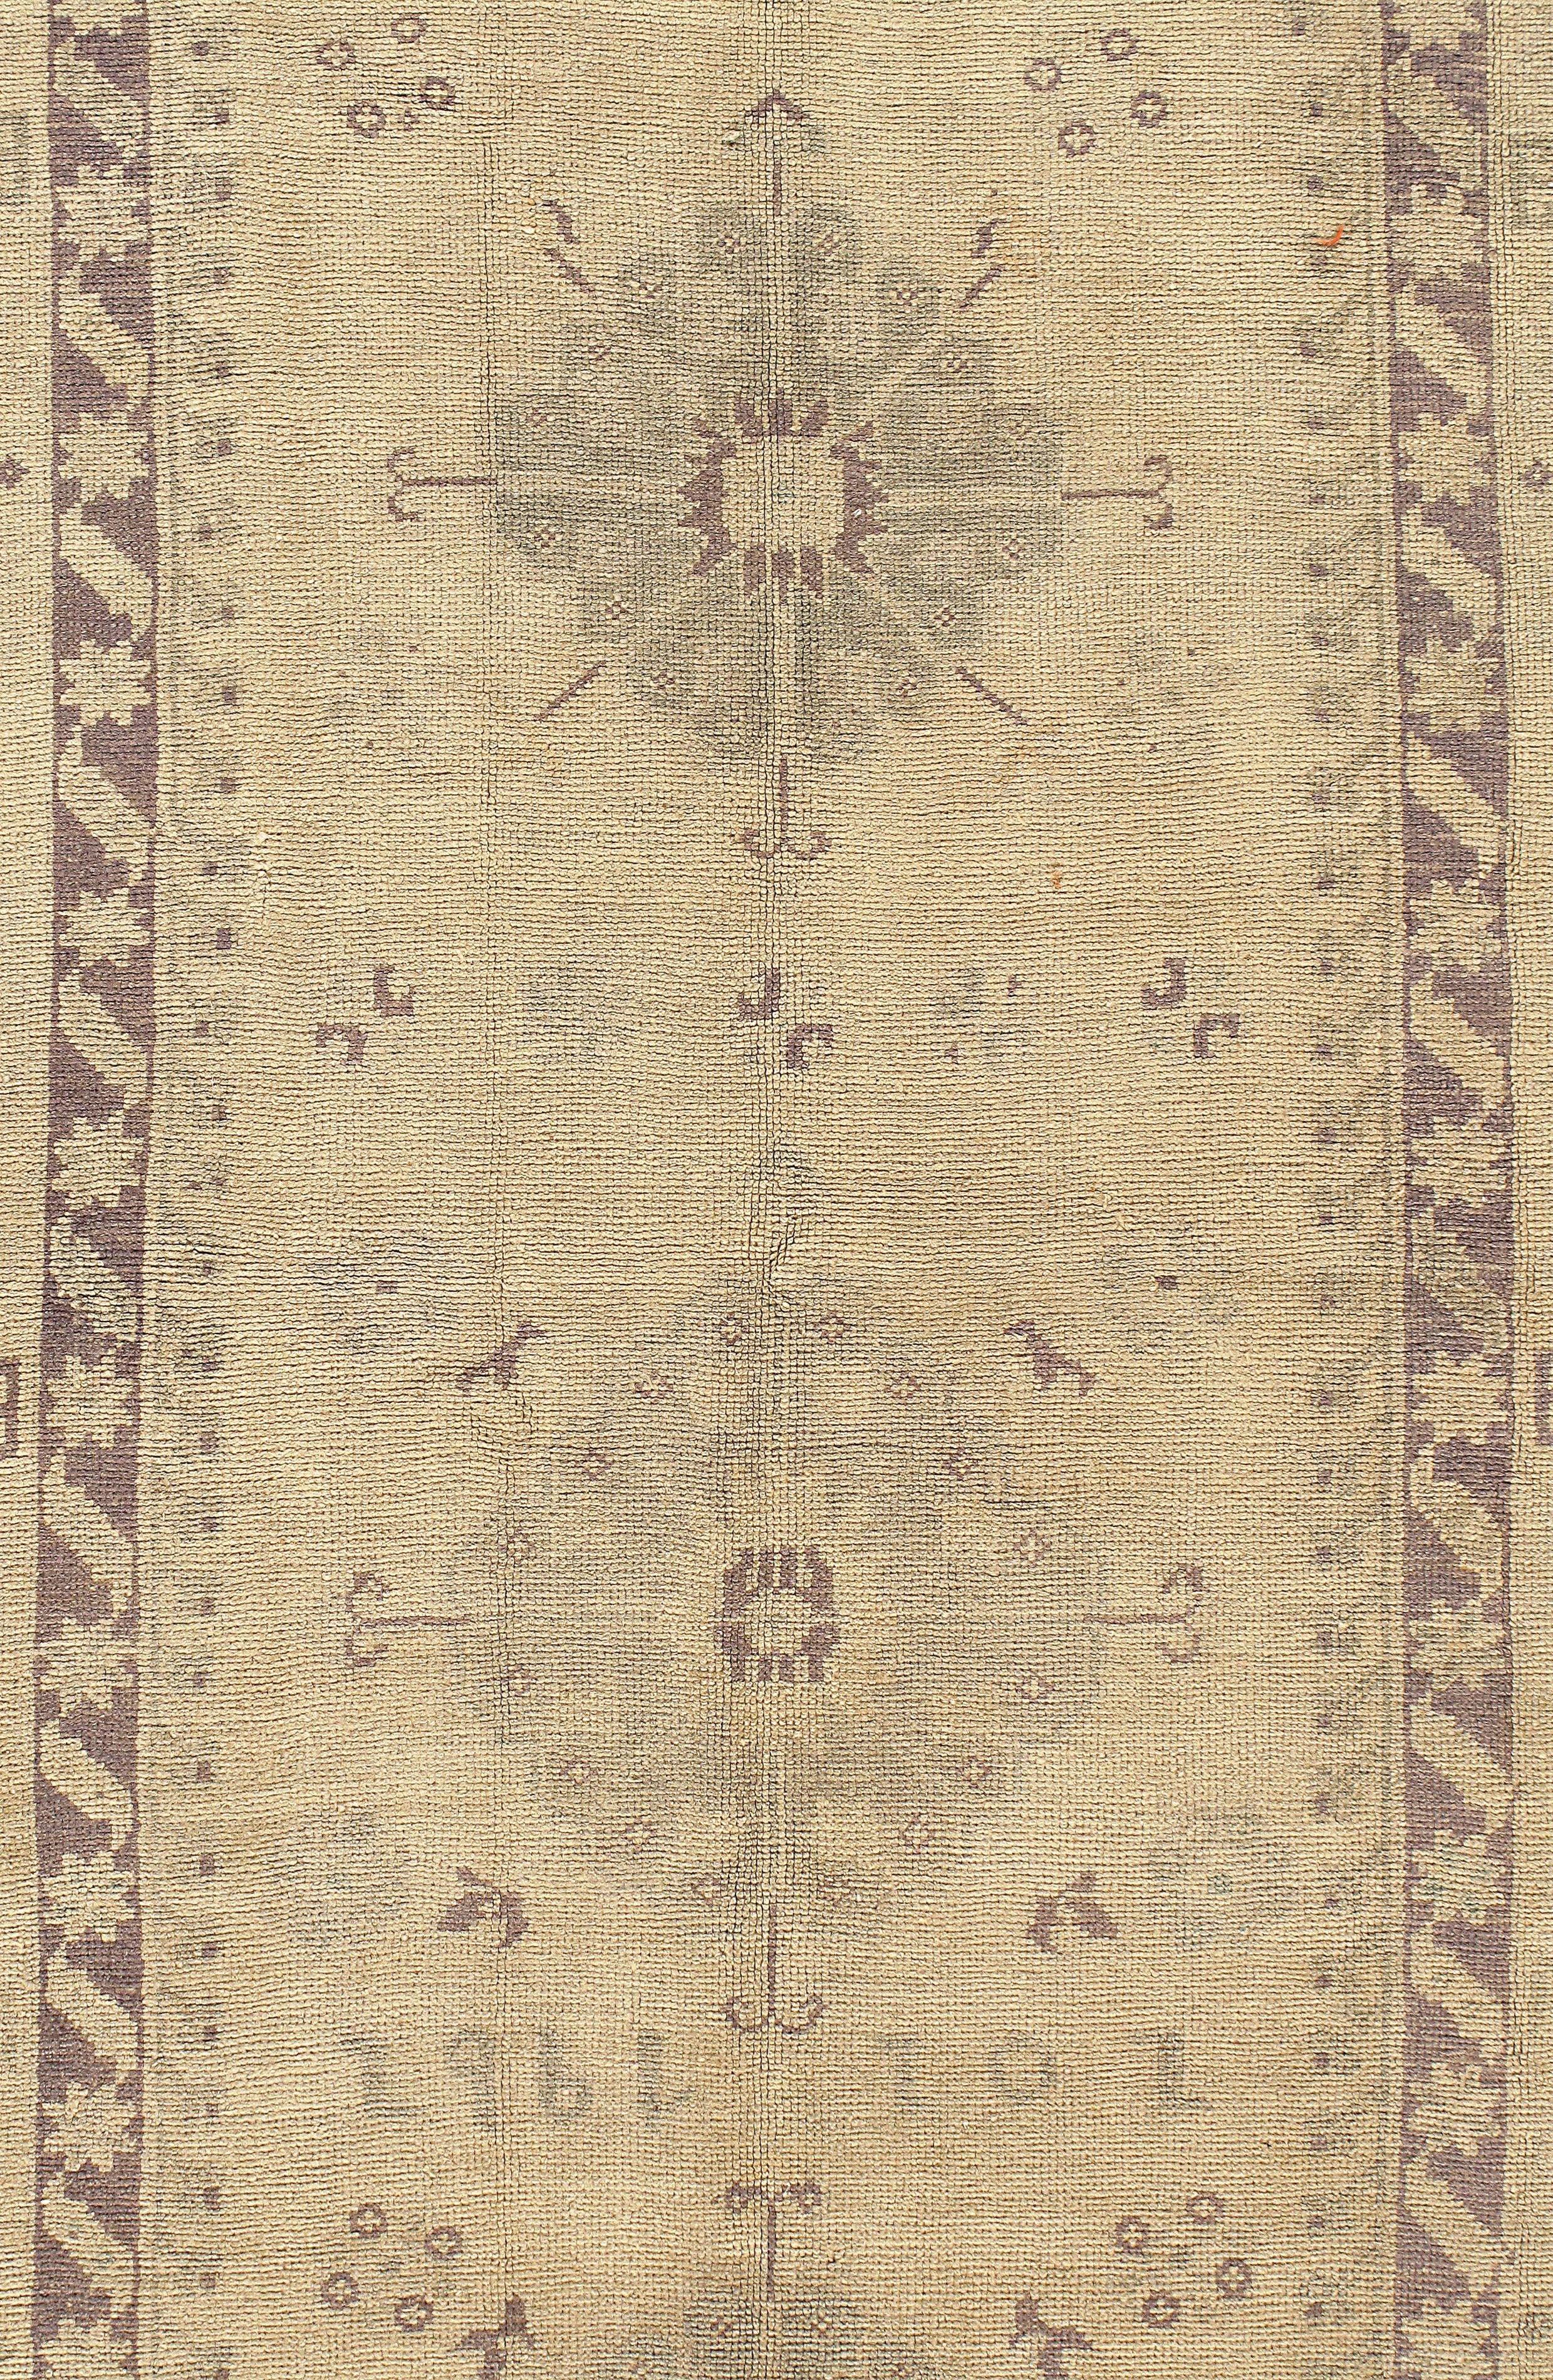 Vintage Turkish Oushak runner. Character, tradition, pattern and palette converge in this gorgeous hand knotted vintage Turkish Oushak runner. Handwoven in Turkey where rug weaving is the culture rather than a business. These designer favourites